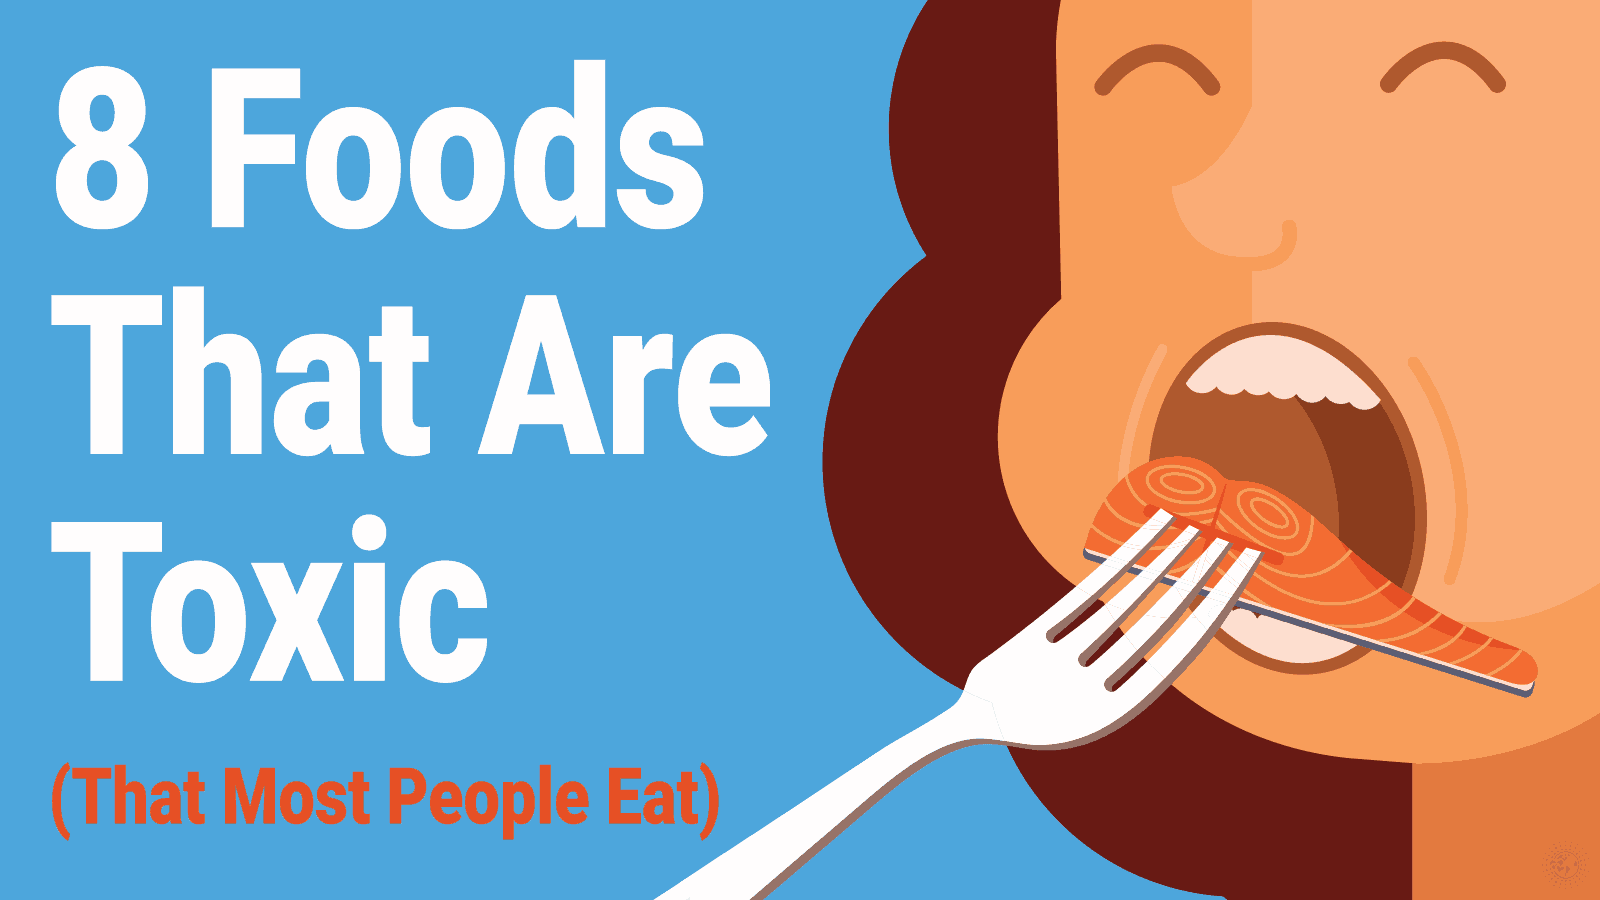 8 Toxic Foods (That Most People Eat Anyway)